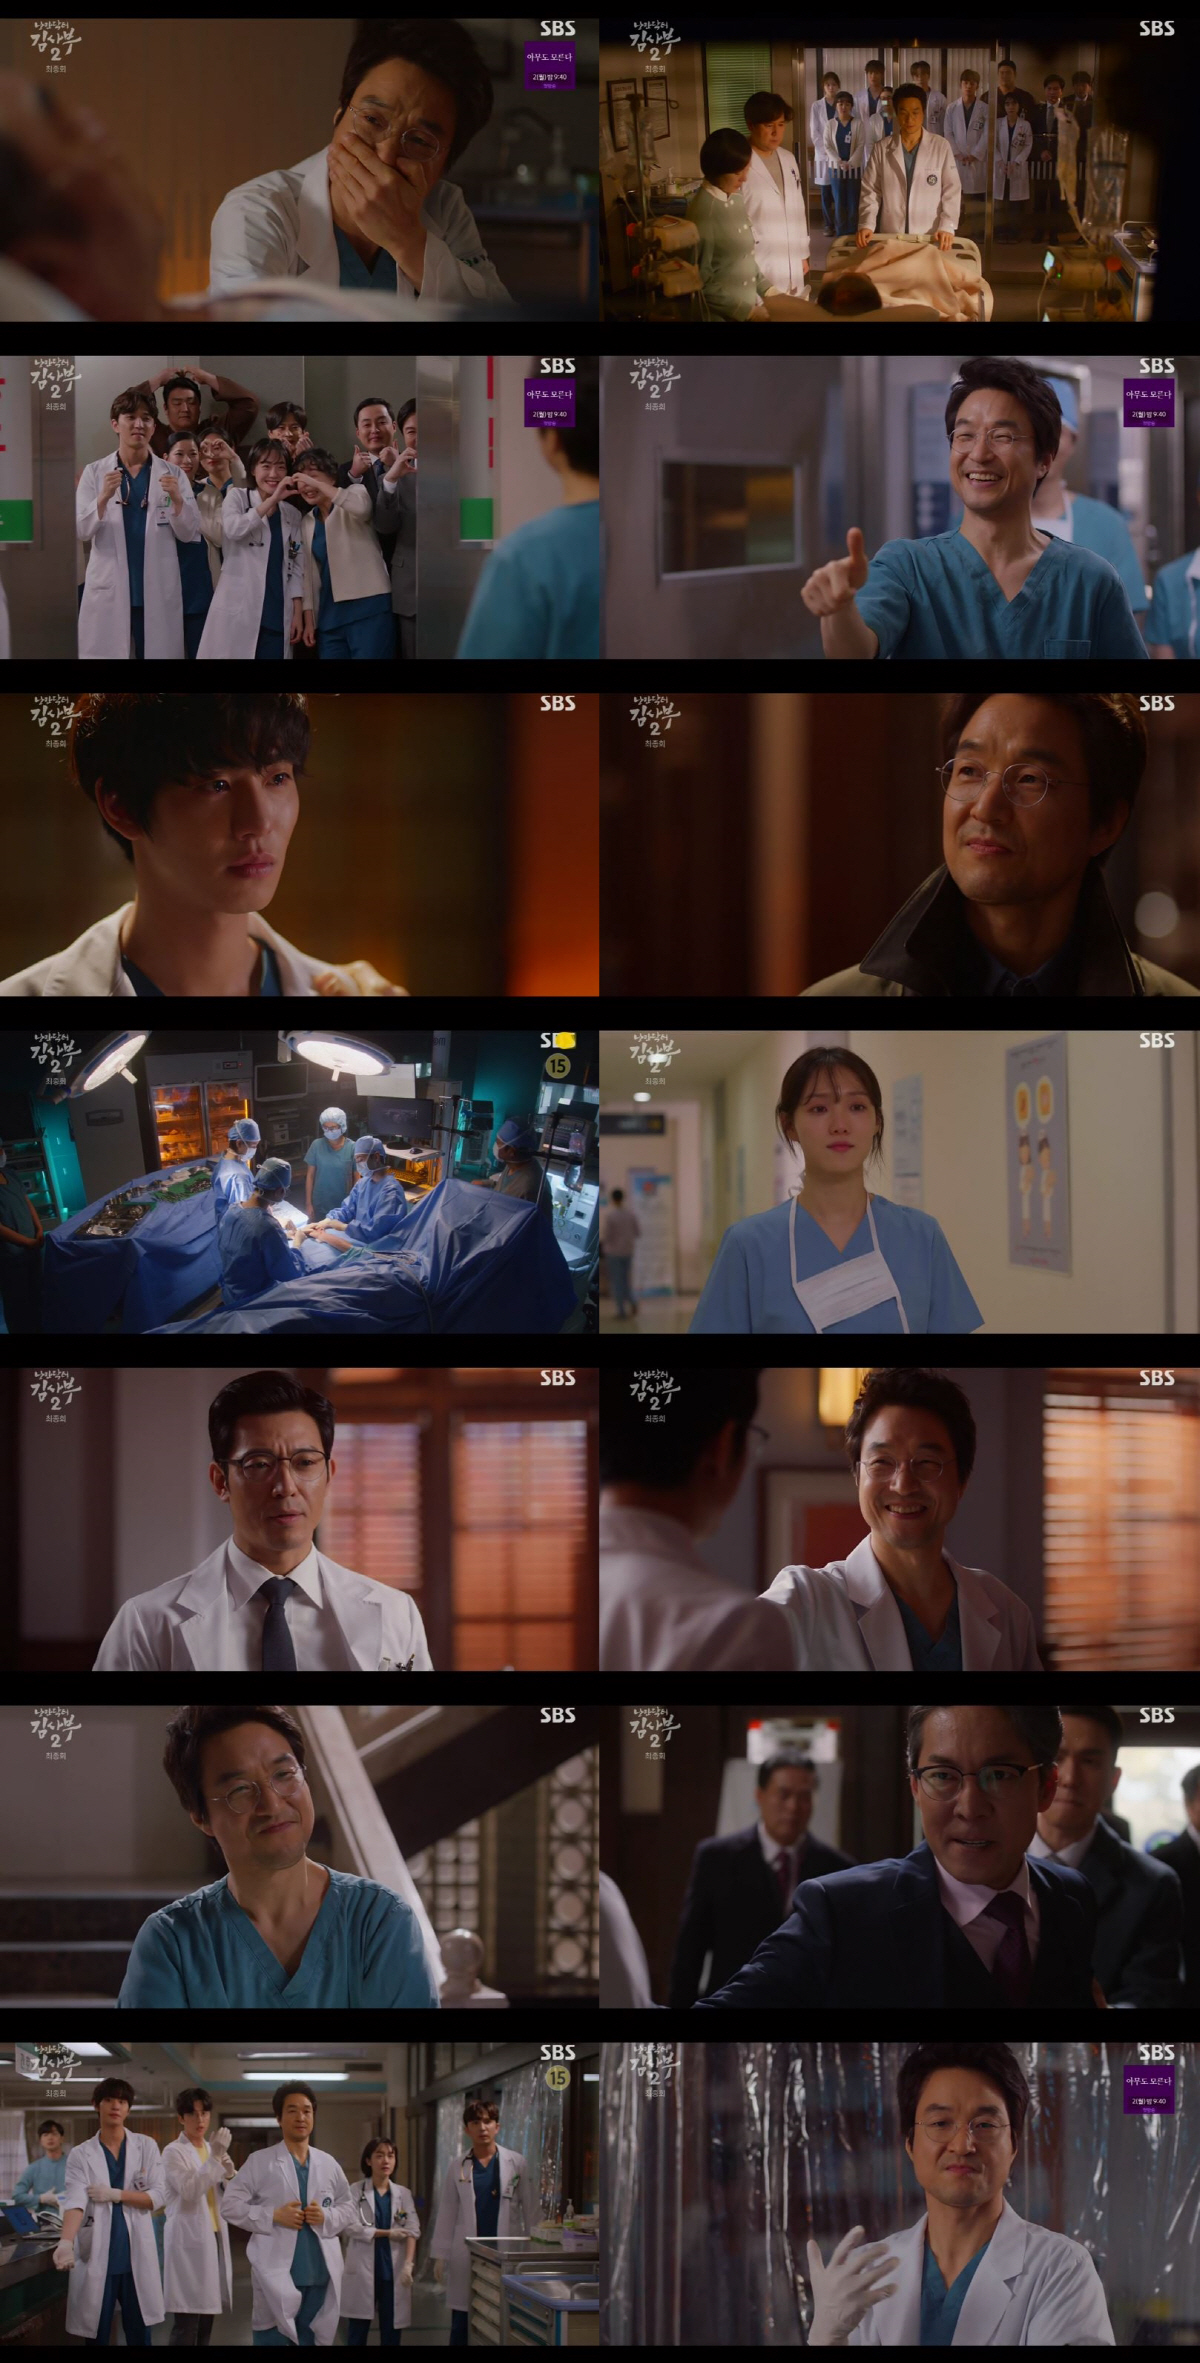 Dont give up asking us the question of why we live and what we live for, and the moment we give up that question, our romance ends.SBS Romantic Doctor Kim Sabu 2 broke through the top TV viewer ratings 28.4% and renewed its own top TV viewer ratings again, ending the grand final with a message of heartbreaking to the end.SBS Wolhwa Drama Romantic Doctor Kim Sabu 2 (playplayplay by Kang Eun-kyung/director Yoo In-sik/produced by Samhwa Networks) was broadcast on the 25th, with Nielsen Korea standards, 27.2% of metropolitan TV viewer ratings, 27.1% of national TV viewer ratings, and 11% of 2049 TV viewer ratings. It surpassed 28.4 percent, and again renewed its highest TV viewer ratings.In addition to the record of exceeding 25% in three years of mini-series dramas, all of the broadcasters achieved the unique TV viewer ratings that ranked first in the pre-Monthly channel for eight consecutive weeks since the first broadcast, and earned the romantic Liu Congs beauty.In the final episode, Kim Sabu (Han Suk-kyu) eventually protected Doldam Hospital independently at Geo University Hospital after ups and downs, and then covered Park Min-guk (Kim Joo-heon) to complete a solid Doldamjas including Cha Eun-jae (Lee Sung-kyung), and Seo Woo Jin (Ahn Hyo-seop).In the drama, Kim Sa-bu was distressed when the female director (Kim Hong-pa), who had set up consciousness, expressed his opinion on the dignity, saying he did not want further life-saving treatment.In the end, Kim accepted the will of the director, and the director of the hospital was silently breathed as the medical staff of the stone wall watched.After that, Kim asked Park Min-guk for three weeks of emergency surgery ahead of CTS surgery, and moved to Park Min-guks heart.And Seo Woo Jin looked through the Monodle Project file and found Kim Sabus diagnosis name, Multiple Sclerosis, and Kim Sabu confirmed with a smile in the answer of Seo Woo Jin.Kim Sabu, who entered the operating room with the support of all medical staff at Doldam Hospital, successfully underwent wrist surgery.However, Do Yoon-wan (Choi Jin-ho), who was trying to remove Doldam Hospital and Kim Sabu, tried to resign Kim Sabu by suggesting that he was MS, and Kim Sabu declared that he became an independent corporation according to the will of Shin, Doldam Hospital is supported by the hospital, but management and hospital system are maintained independently.With the news that a large fire occurred behind Doyunwan, who is angry and turning around, Kim Sabu and the Doldams who keep their position in the emergency room were included, and the Romantic Preservation Law, which recalls beautiful values, .In this regard, we have summarized the things left by Romantic Doctor Kim Sabu 2, which shook South Korea with romantic gusts over the past eight weeks.What Romantic Doctor Kim Sa-bu 2 Leaves NO.1Han Suk-kyu - Lee Sung-kyung - Ahn Hyo-seop - Jin Kyeong - Im Won-hee - Kim Min-jae The first prize that made Romantic Doctor Kim Sabu 2 shine is Han Suk-kyu, who played a unique role in season 2 following season 1 as a geek genius Physician Kim Sabu.Han Suk-kyu overwhelmed the house theater with invariable charisma, making Kim Sabu, who has a sense of humanity and a vocation as a Physician, respecting the value of humanity with extreme acting power that does not need explanation.Lee Sung-kyung has completely digested Cha Eun-jae, who is suffering from surgical depression due to mental pressure as he goes on the path of Physician he does not want, and further enhanced the immersion of the drama.Ahn Hyo-seop overcame the painful past of family suicide and became a human being, and became a Physician. He got a hot response by expressing the sorrow of Hot Summer Days and youths realistically.In addition, Jin Kyeong - Im Won-hee - Byun Woo-min - Kim Min-jae - Yoon Na-ri exudes the prestige of Doldamjas with his acting ability that is superior to season 1, and Shin Dong-wook - Kim Joo-heon - Park Hyo-ju - Soju-yeon,Actors enthusiasm and efforts without smoke holes have made Romantic Doctor Kim Sabu 2 a life drama.What Romantic Doctor Kim Sa-bu 2 Leaves NO.2- Kang Eun-kyung, who created Legend  m, - Synergies of director Yoo In-sikKang Eun-kyung, who has not only the medical community but also the social issues of the present age, and has been holding a cool nuclear cider and a hearty soul at the same time, focused viewers with a solid and urgent story development.The ambassador, who was a village killer, inspired the audience to be awakened following empathy, and in the immersive remady, where the episodes of patients and characters were entangled in the motif of actual events, there was a sense of touch, lessons and laughter.Yoo In-sik made the detailed remady of each character stand out with delicate and sensual production beyond the dimension of any medical drama, while completing rich sights and three-dimensional scenes, creating a Legend masterpiece in a good name.What Romantic Doctor Kim Sa-bu 2 Leaves NO.3- The meaning of romantic that reminds us of the value of human beauty, humanity, life, and lifeThe biggest reason why Romantic Doctor Kim Sabu 2 shook South Korea is in the special meaning and message of romantic which is deep echo.It is difficult to have a traumatic center due to the political quality that tries to control power in the hospital with the patient as a pawn, and the sad real problems that are being ignored by serious trauma patients and trying to hang on to money treatment were projected through Kim Sabu and Doldam Hospital.Moreover, in the case of patients who maximized reality based on actual cases, they dealt with sensitive issues in the present age from organ donation to dignity, which caused the audience to feel sympathy.In addition, as a Physician, Kim Sabus responsibility and conviction, which only emphasizes the life of the patient, blended with romantic, and reminded him of his own awareness of the values ​​of humanity that people want to protect, why they live, and what they live for.Samhwa Networks said, I would like to express my sincere gratitude to many viewers who have always been enthusiastic and explosive in Romantic Doctor Kim Sabu 2 following Romantic Doctor Kim Sabu 1. Thank you for your love and affection for Romantic Doctor Kim Sabu 2I hope that you have gained warm comfort for a while in your tired and difficult daily life through Romantic Doctor Kim Sabu 2, and I hope that Kim Sabus romance will be remembered in all of you for a long time. 